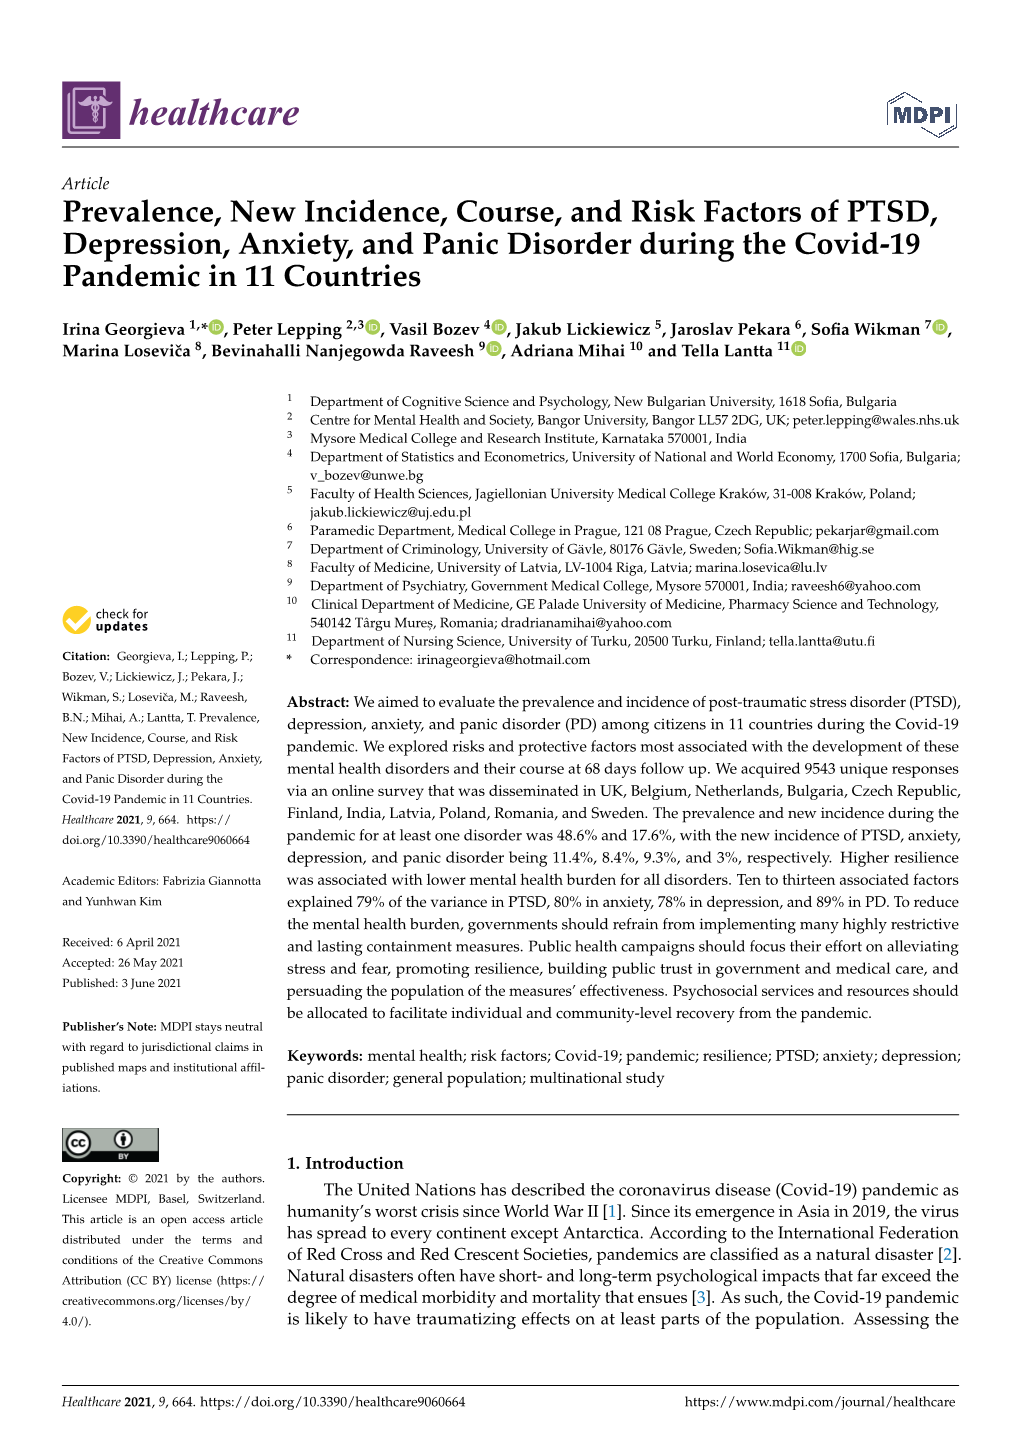 Prevalence, New Incidence, Course, and Risk Factors of PTSD, Depression, Anxiety, and Panic Disorder During the Covid-19 Pandemic in 11 Countries